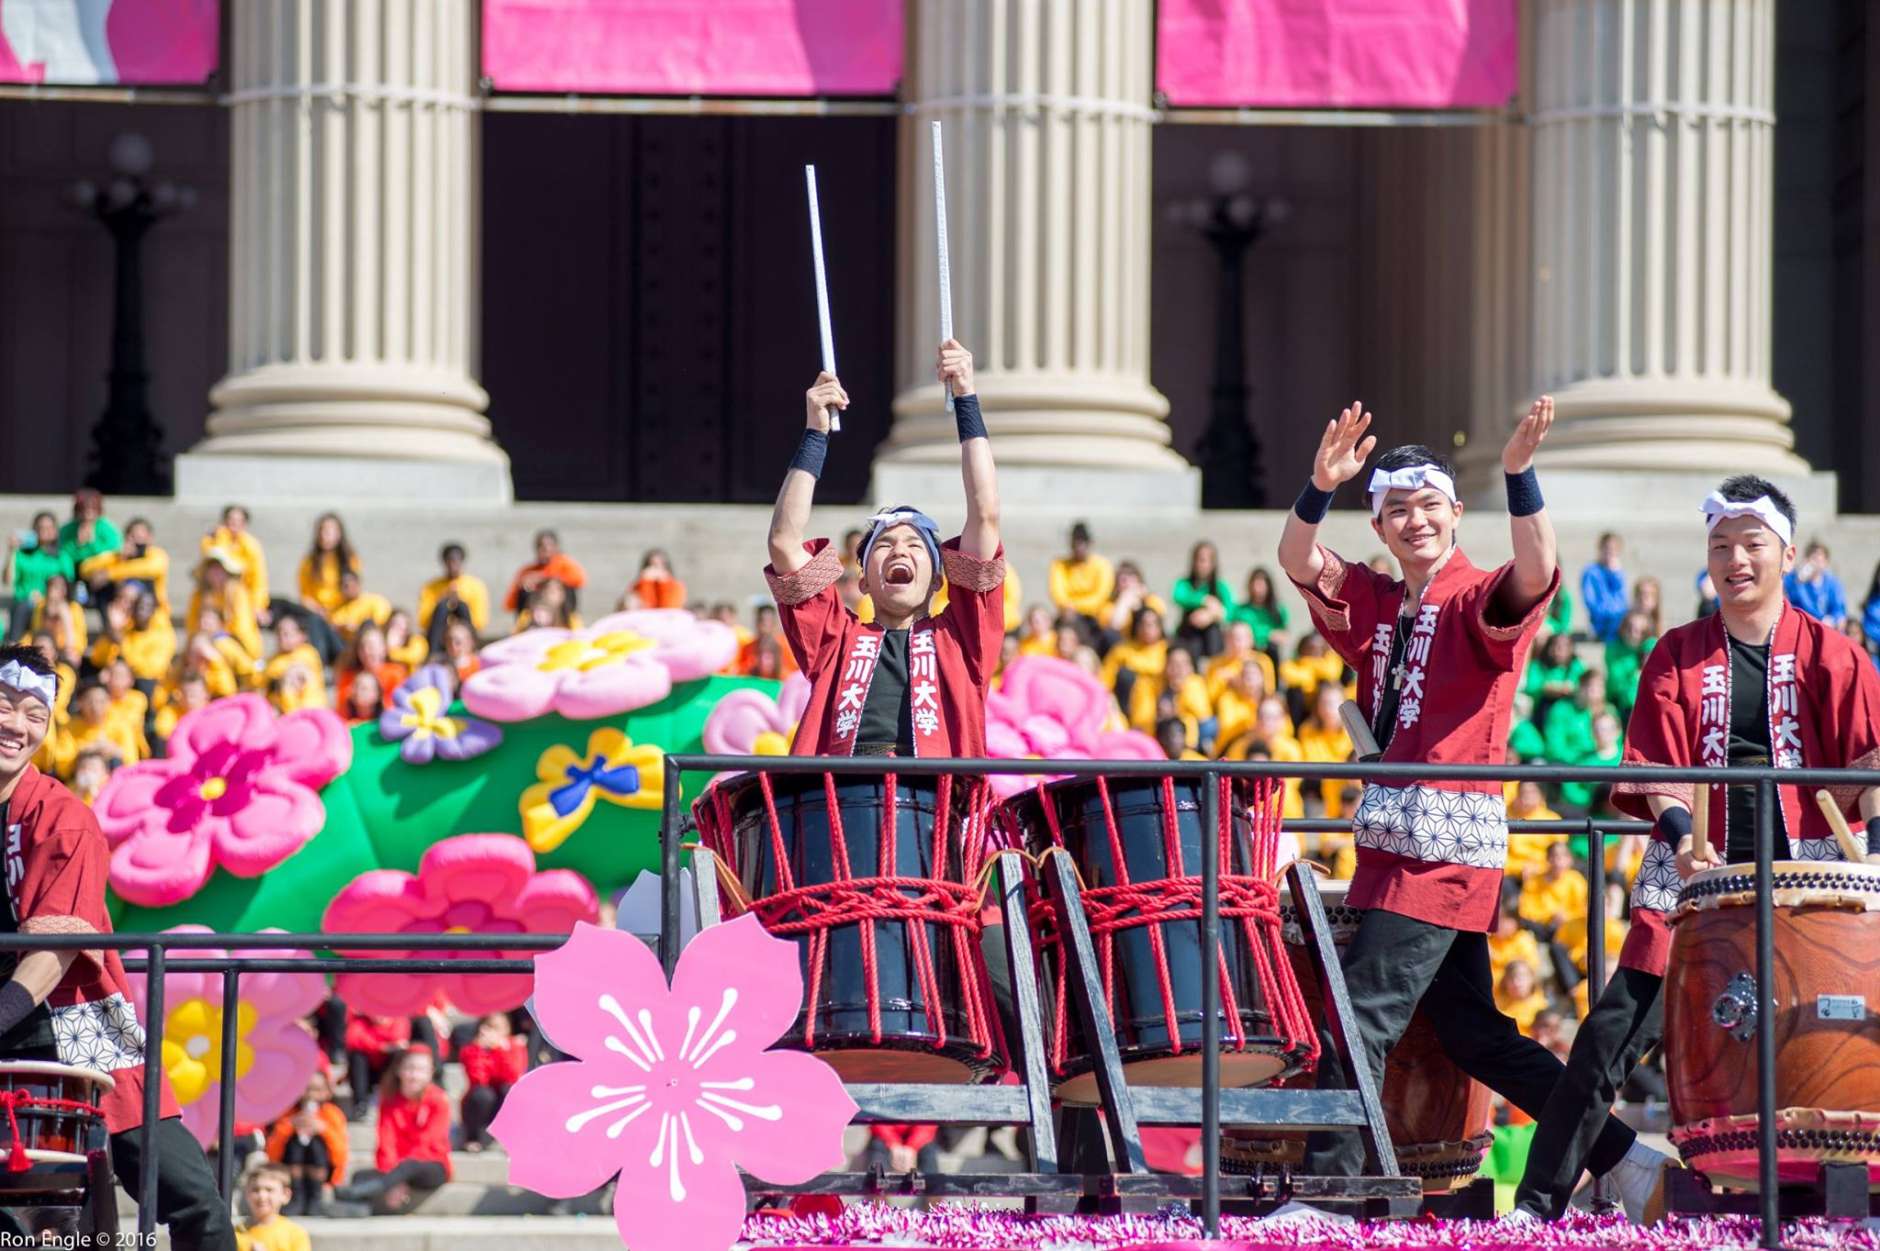 Taiko drummers were also a part of last year's National Cherry Blossom Parade. (Photo courtesy Jeff Song and Ron Engle)